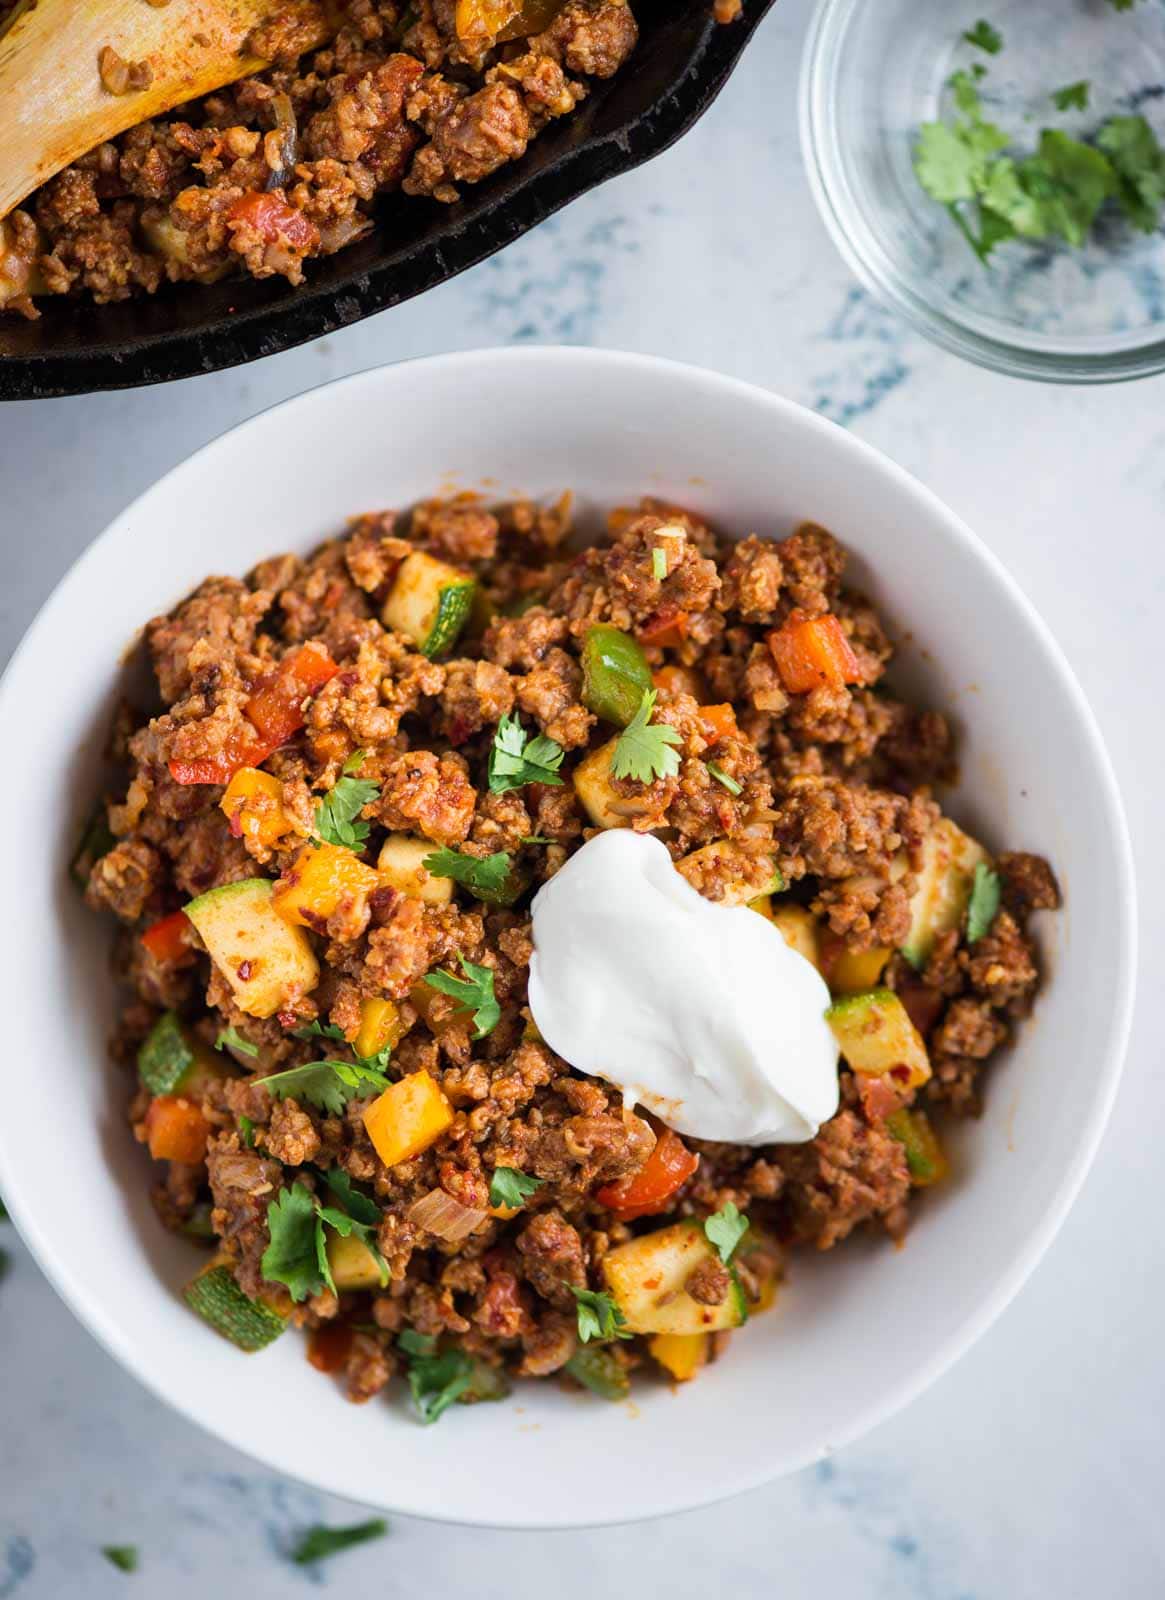 Healthy Ground Beef Vegetable Skillet Recipe - The flavours of kitchen